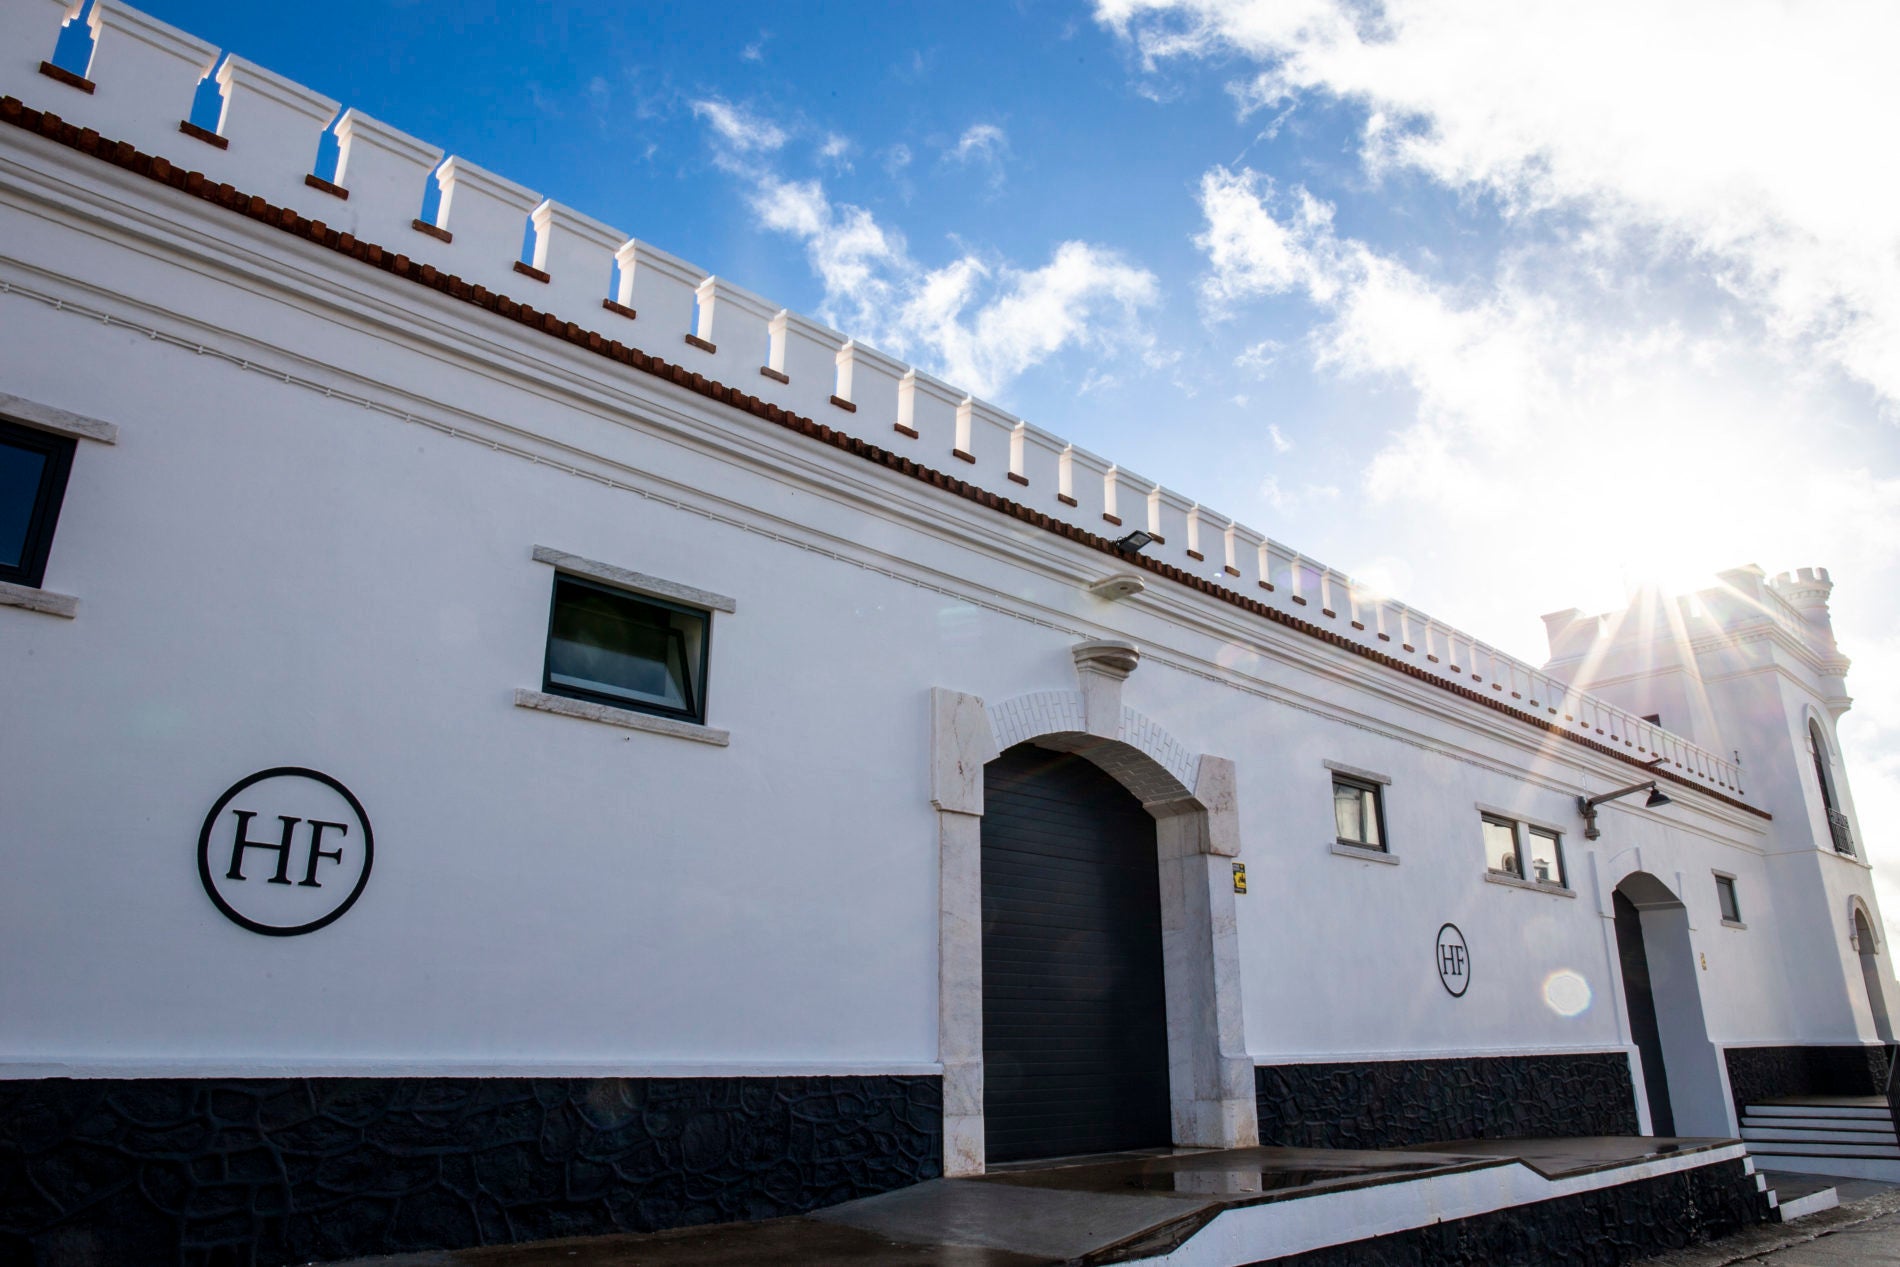 Howard’s Folly opens new state-of-the-art winery in Estremoz town centre